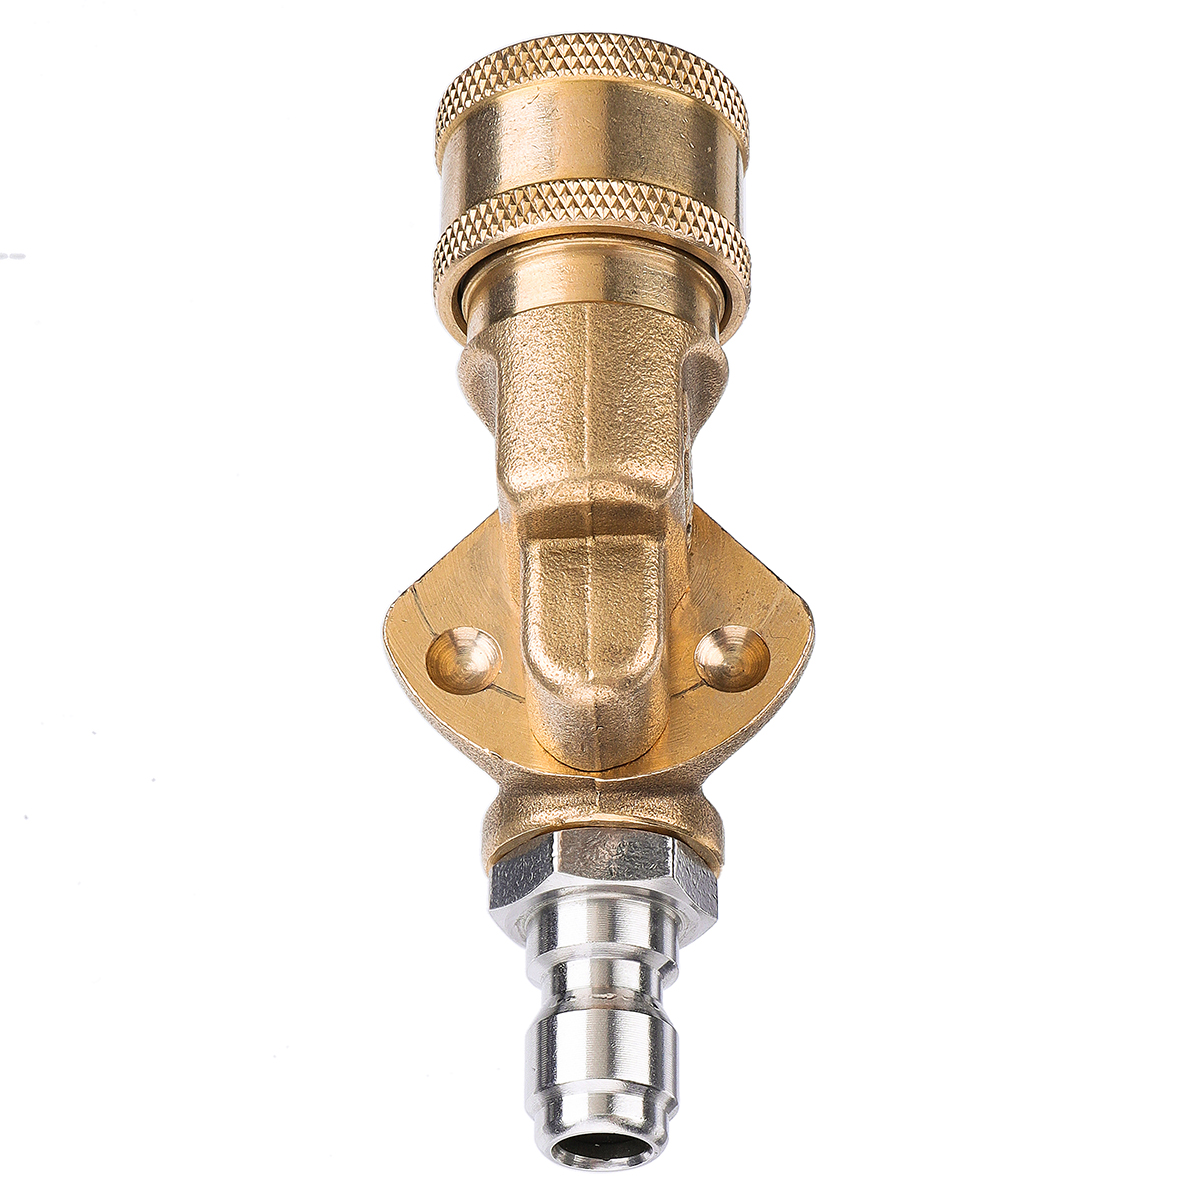 5Pcs-20-GPM-High-Pressure-Washer-Spray-Nozzle-Tips-with-Connector-14-Inch-Quick-connect-4500PSI-90de-1594773-8